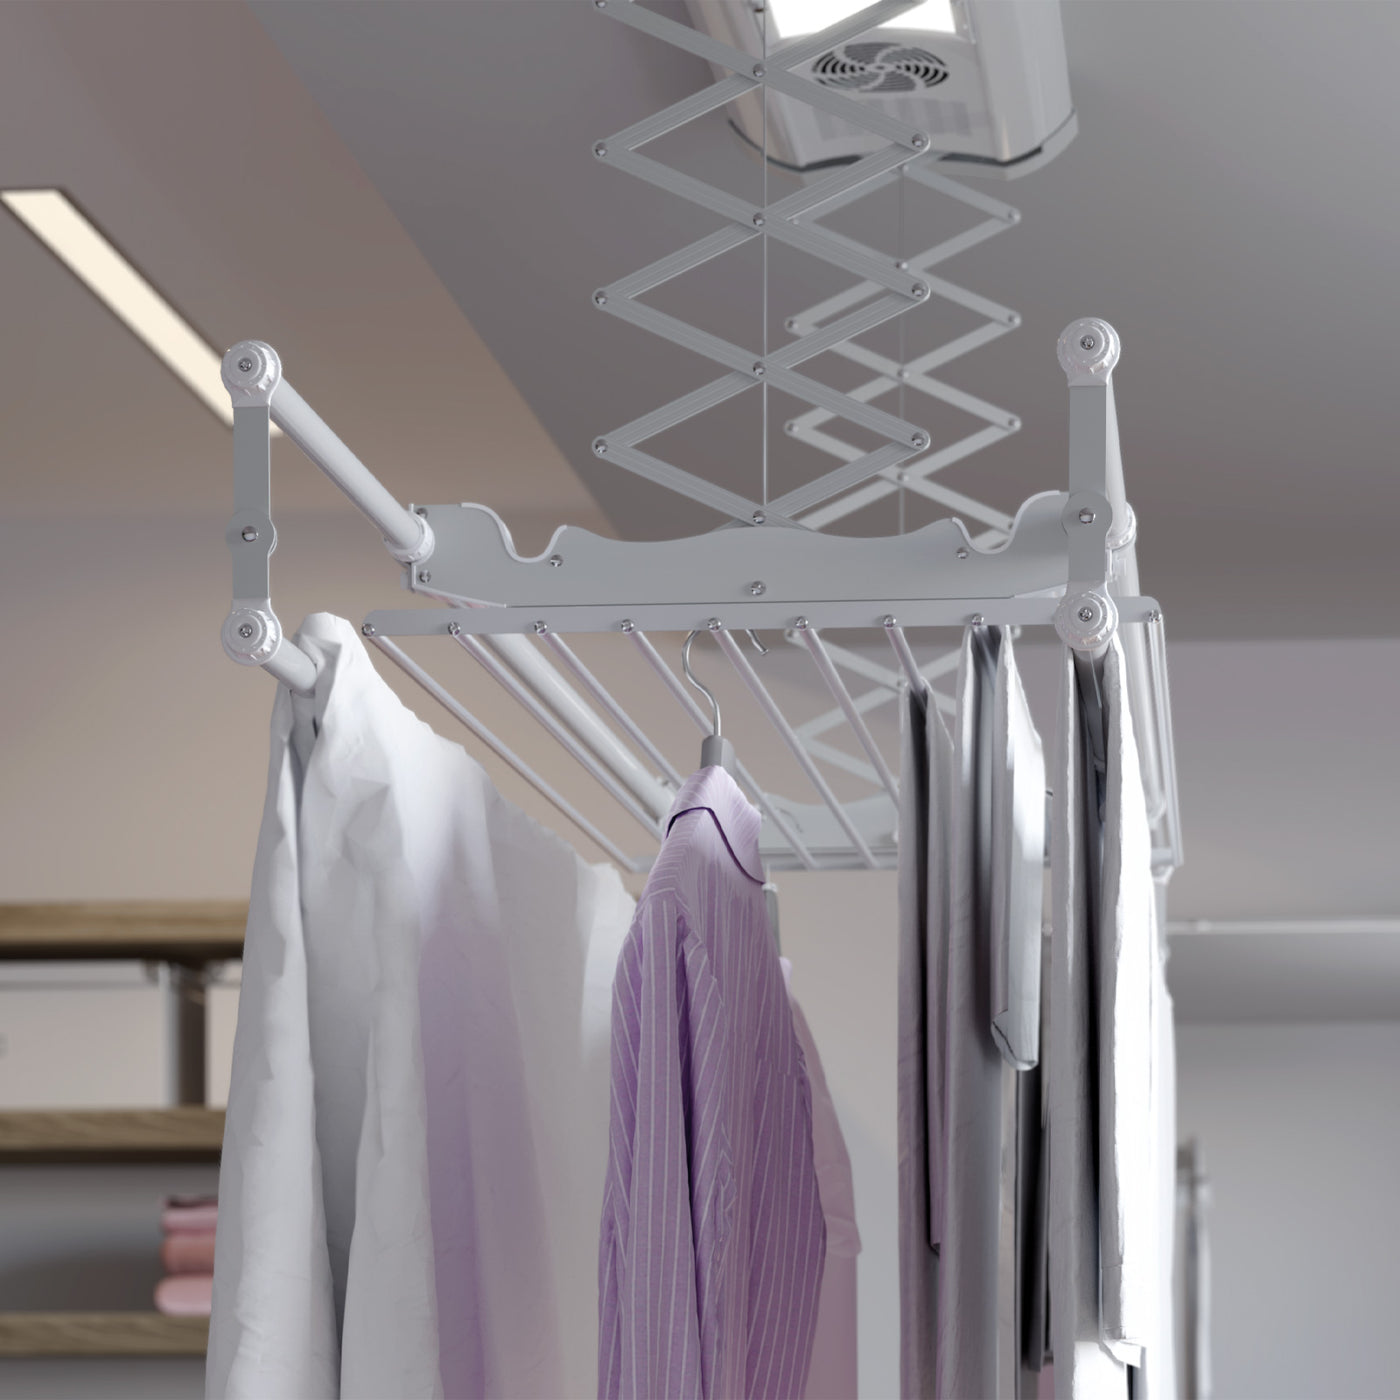 Laundry Drying Rack, Ceiling Mounted Clothes Drying Rack, Laundry Hanging  Rack, Laundry Rack Wood, Drying Rack for Laundry, Clothes Airer -   Israel